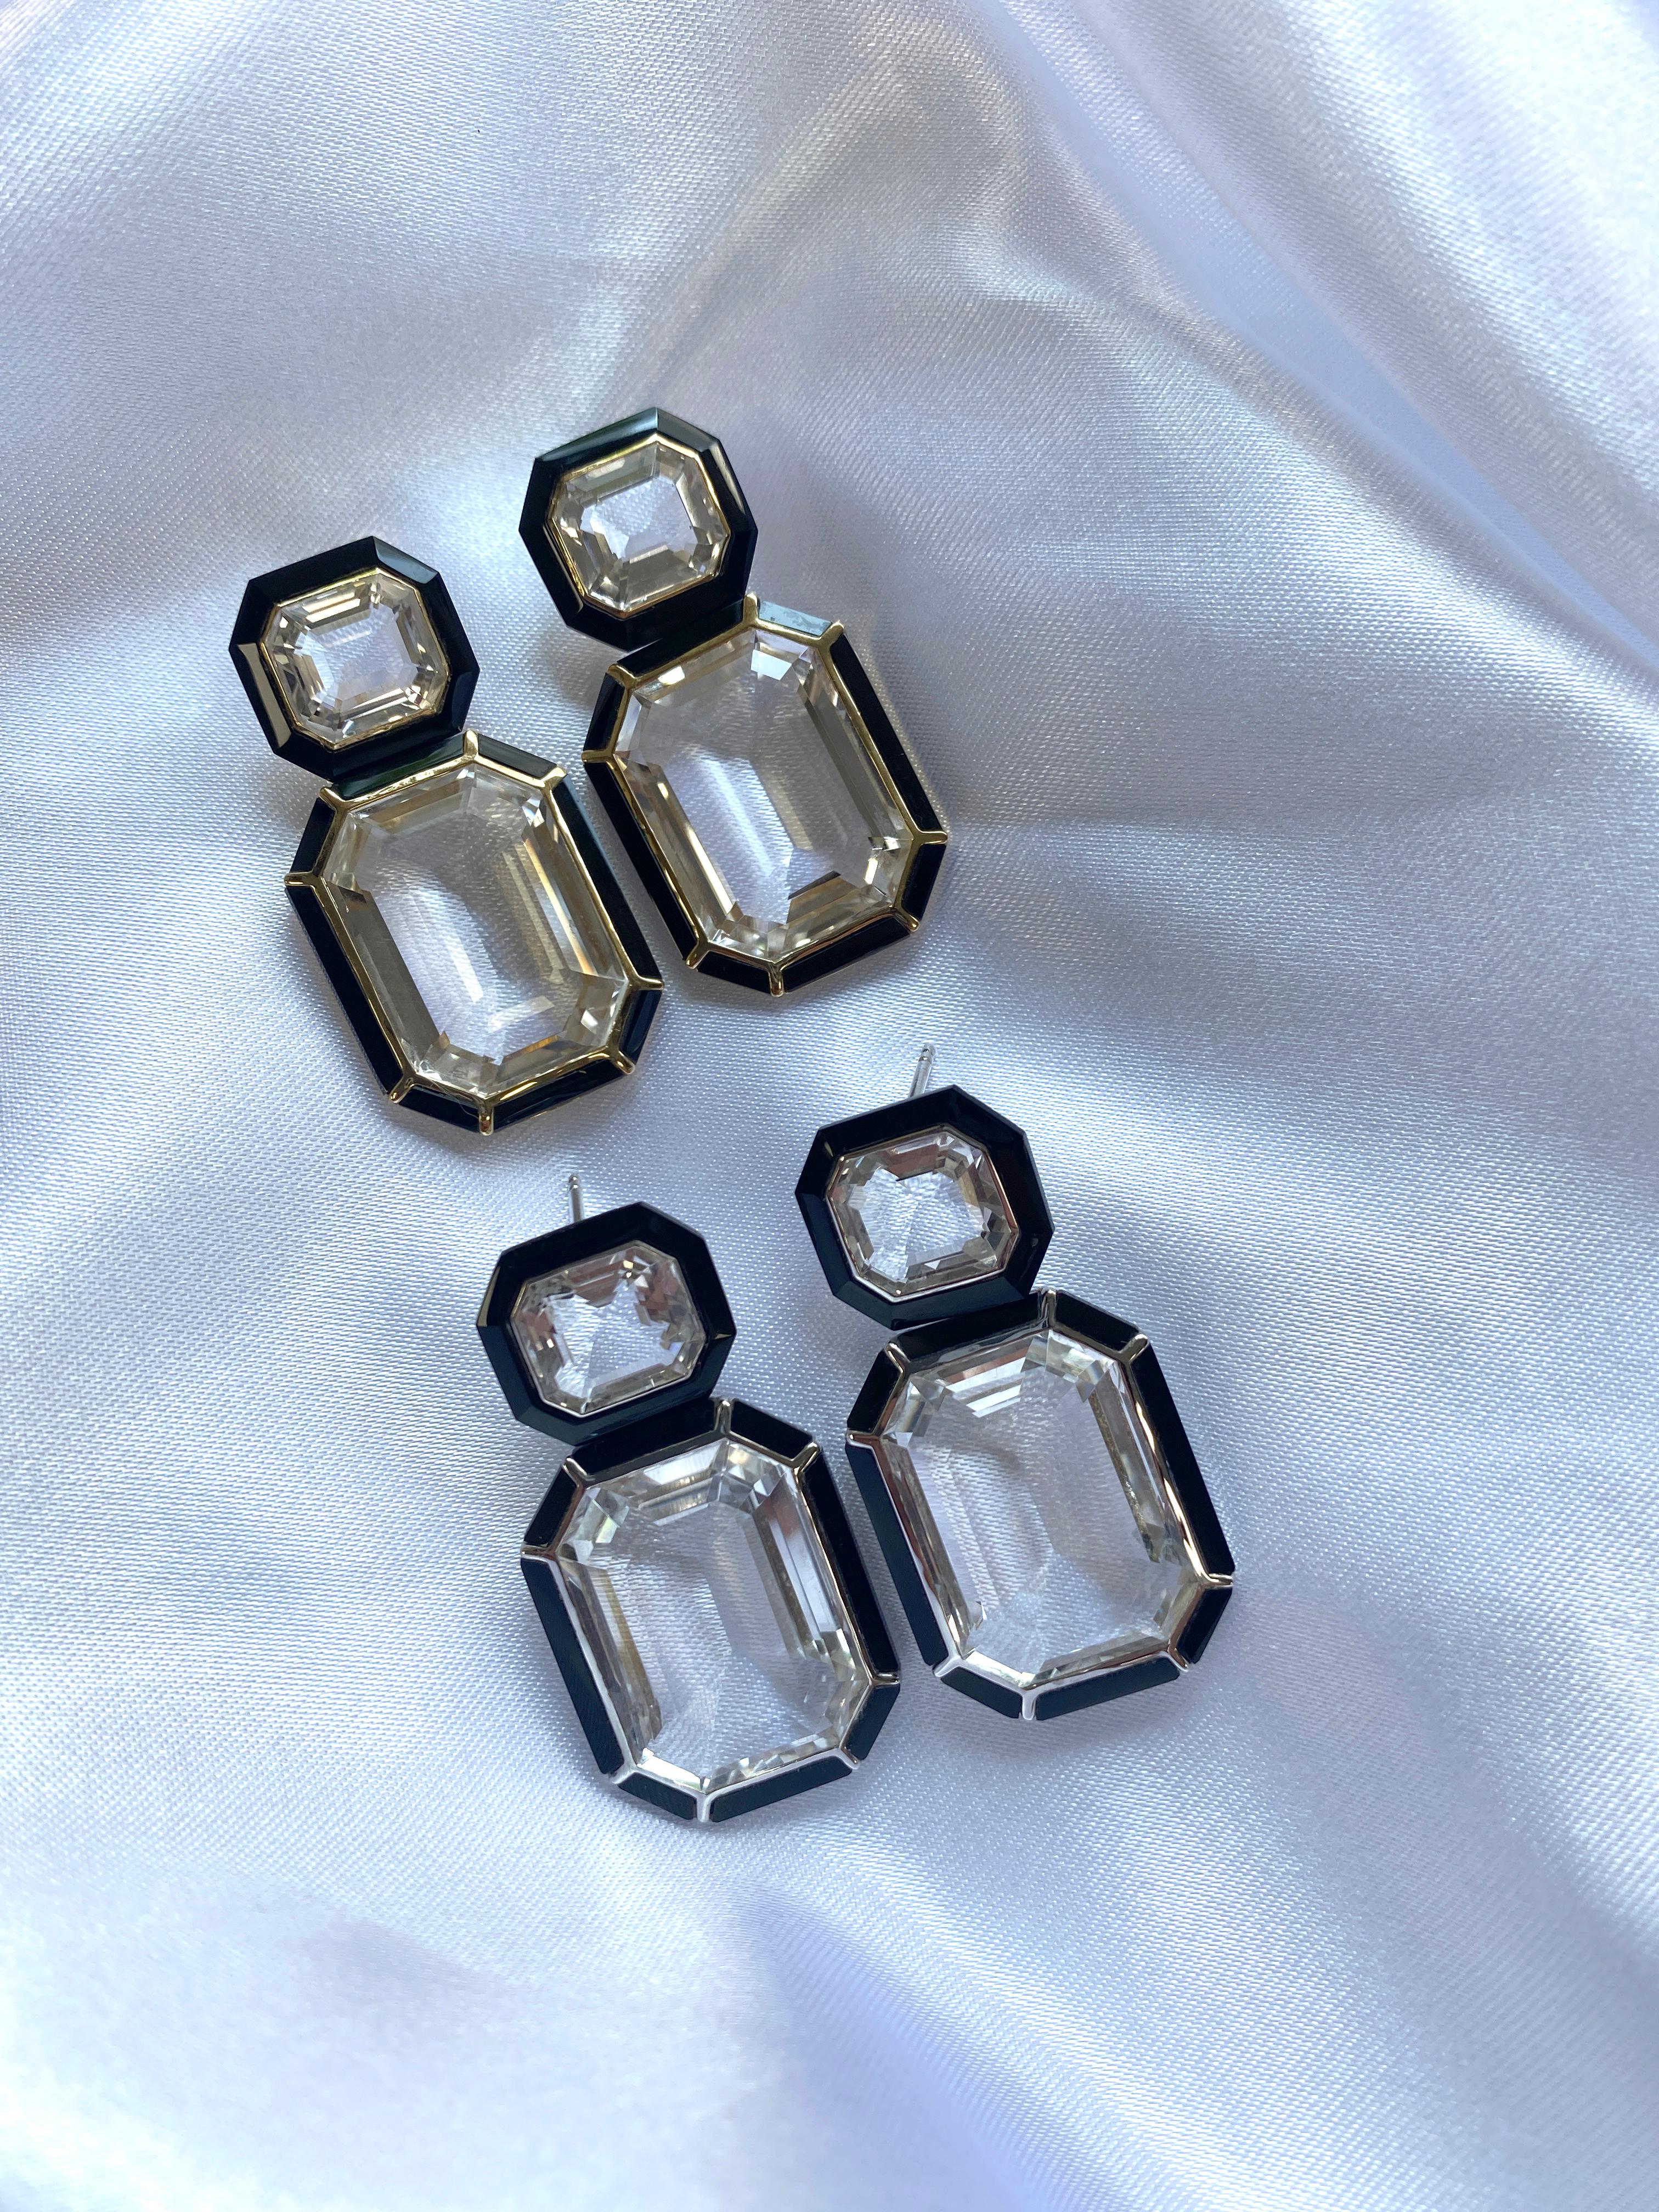 Rock Crystal and Onyx Emerald Cut Earrings in 18K Yellow Gold, from 'Mélange' Collection.

Beautifully crafted, these special pieces from Goshwara are not to be missed!

* Gemstone: 100% Earth Mined 
* Approx. gemstone Weight: 38.03 Carats (Rock